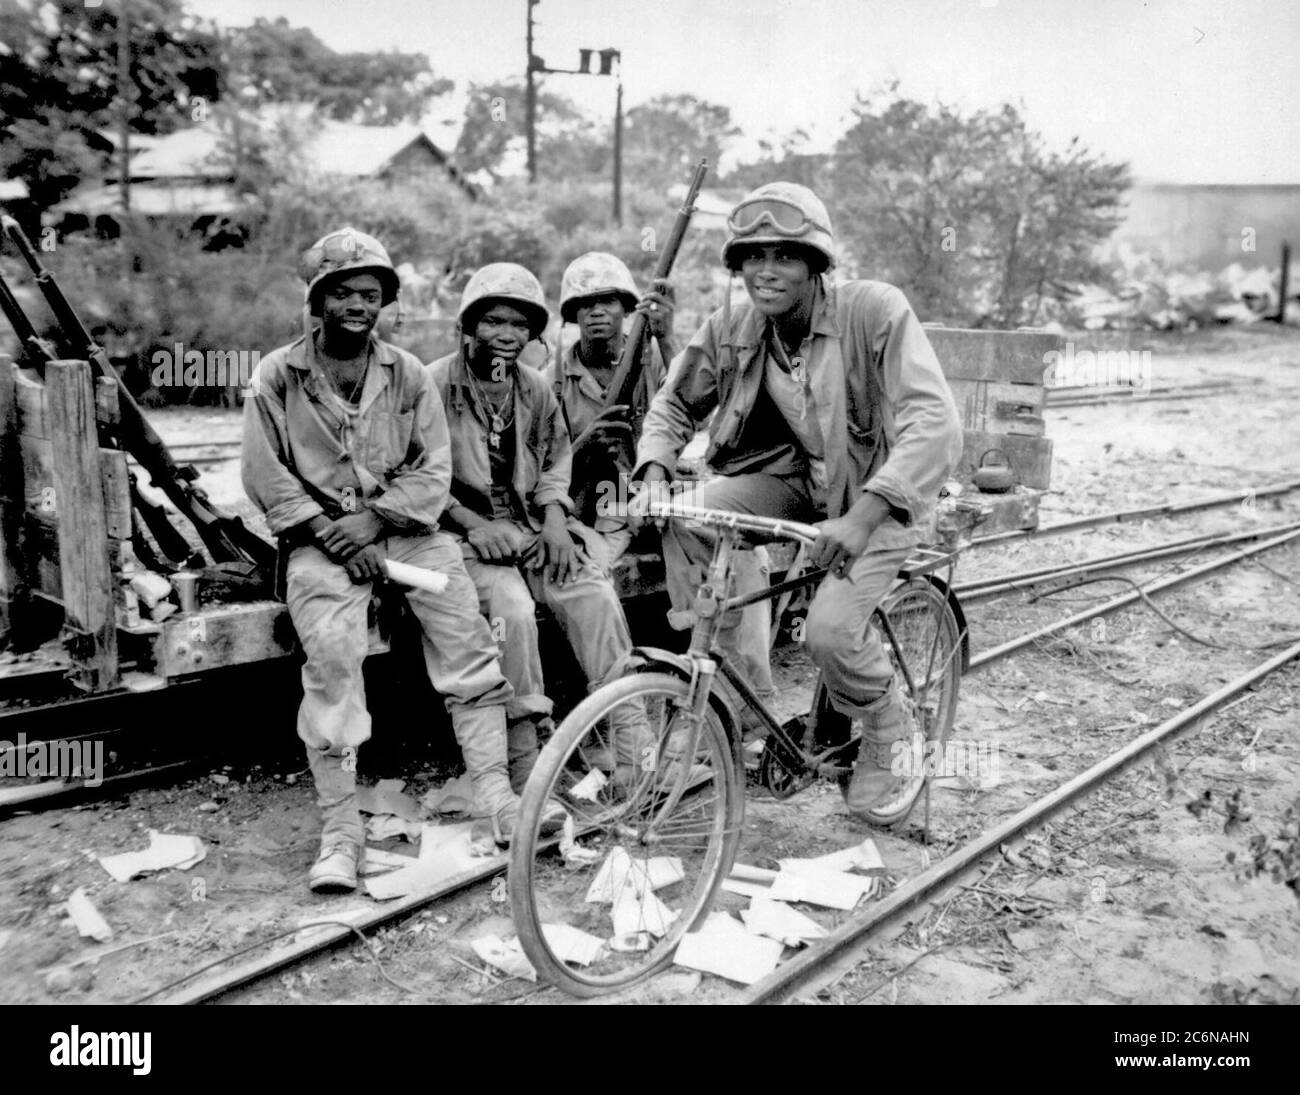 Black Marines, attached to the 3rd Ammunition Company, take time out from supplying ammunition to the front line on Saipan. Riding a captured bicycle is Pfc. Horace Boykin while (left to right) Cpl. Willis T. Anthony, Pfc. Emmitt Shackelford and Pfc. Eugene Purdy watch, June 1944. Stock Photo